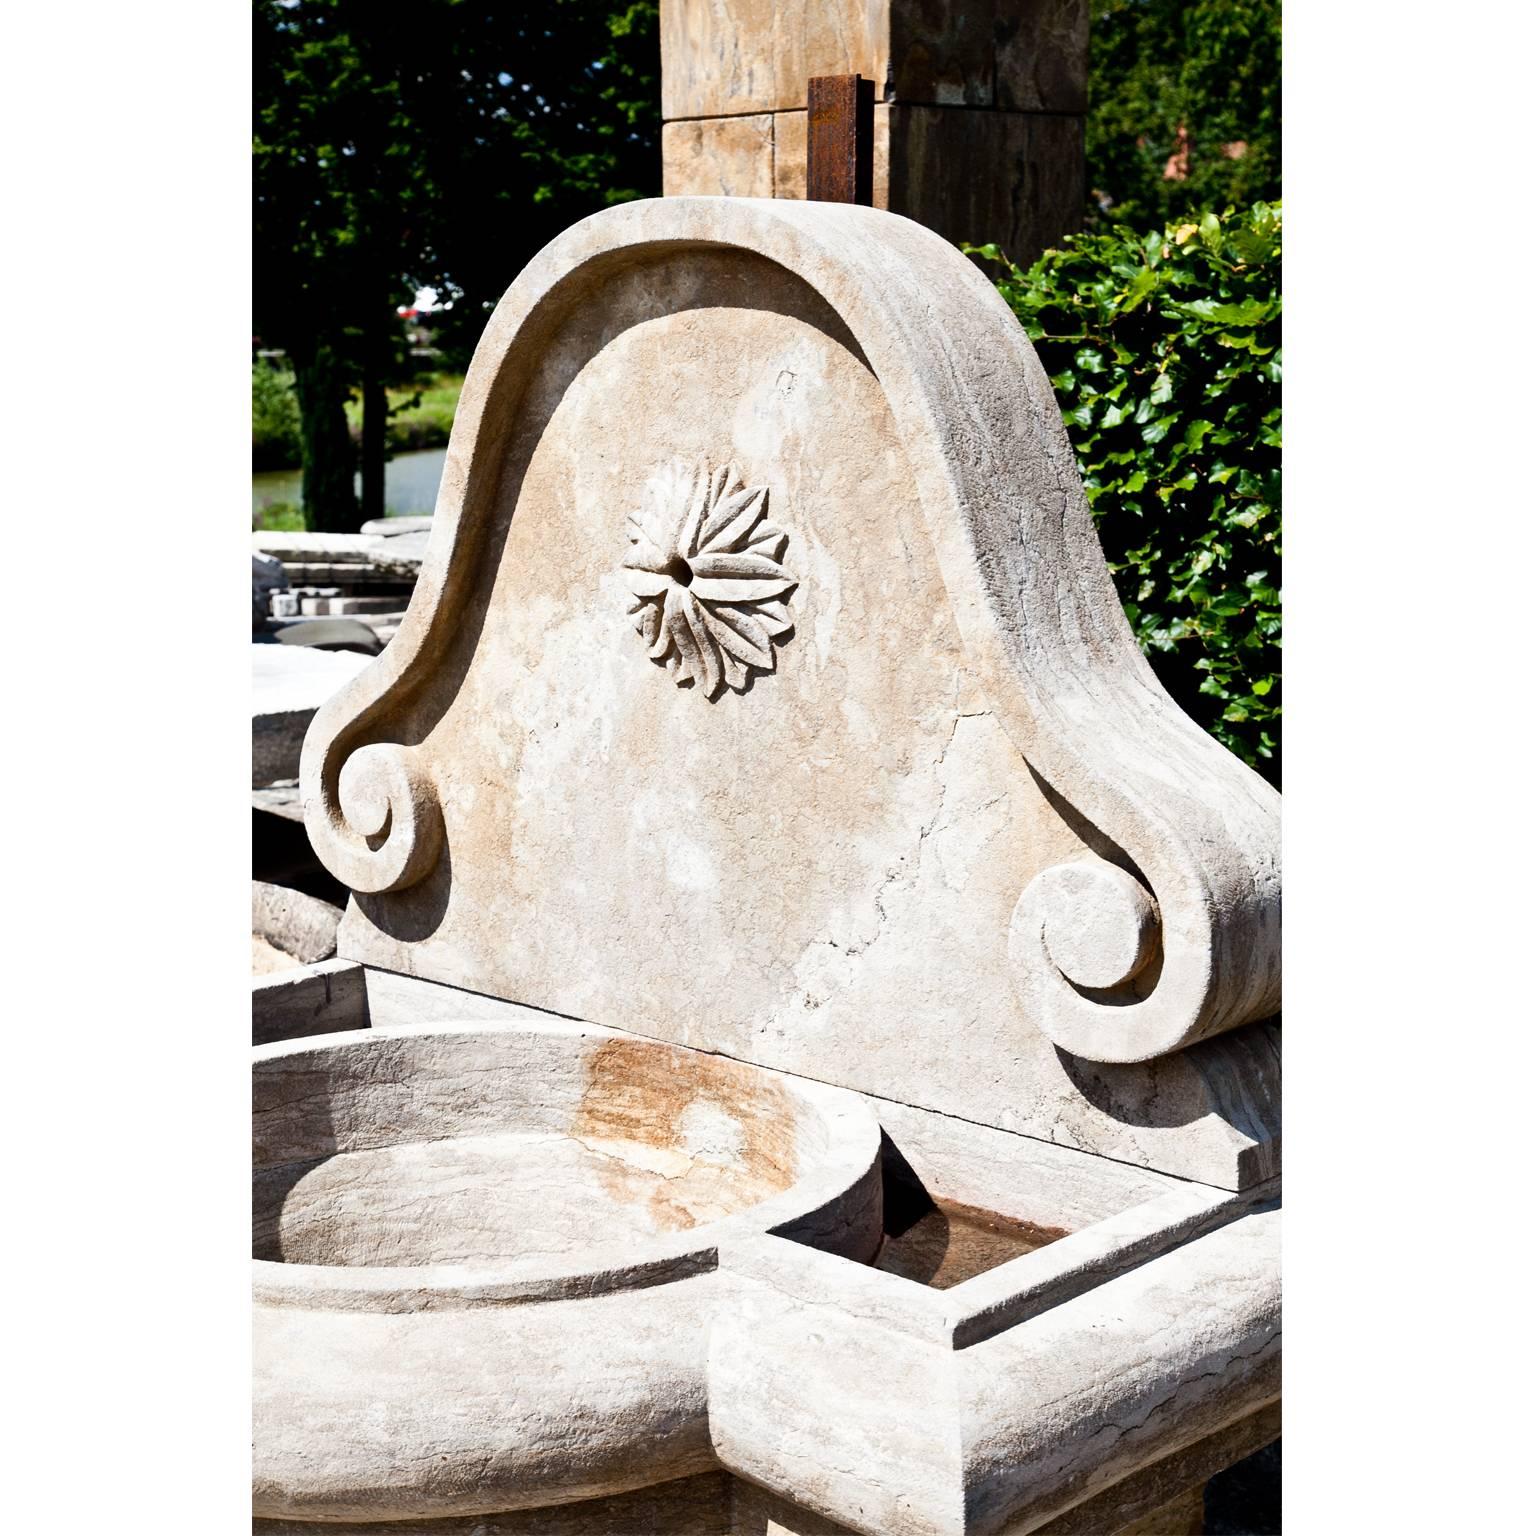 Renaissance Wall Fountain in Antique Style